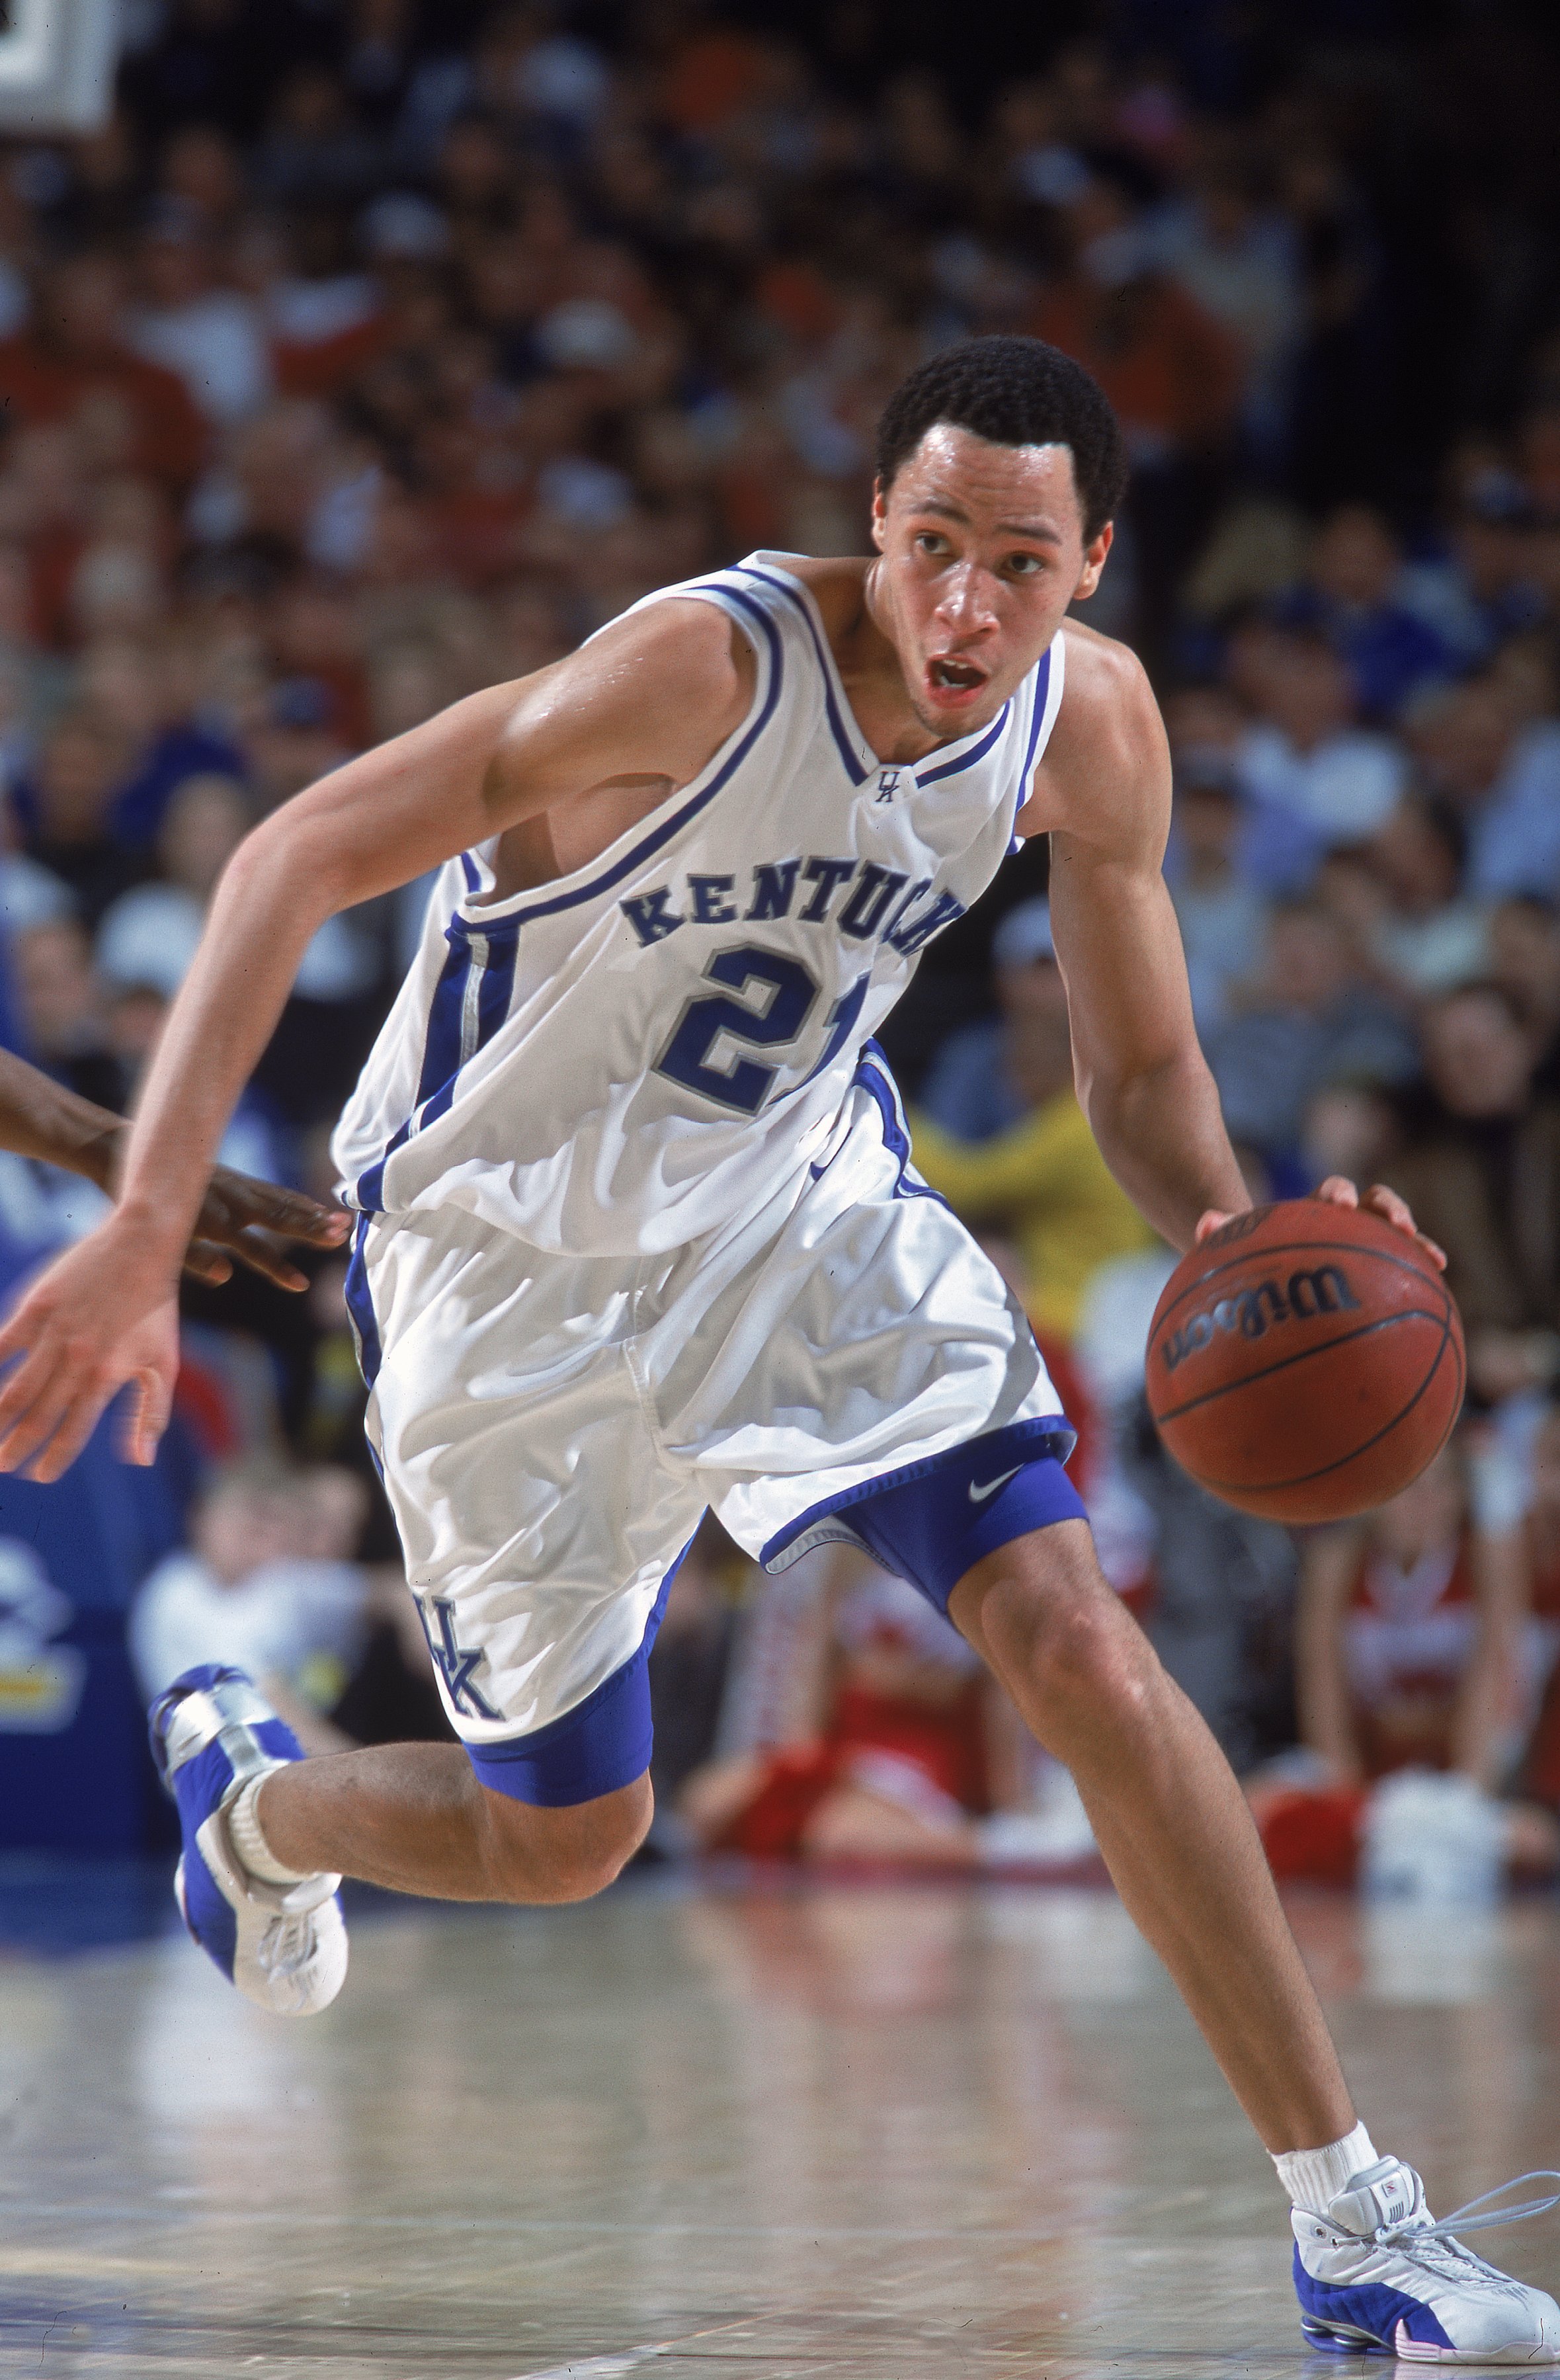 8 Mar 2001:  Tayshaun Prince #21 of the Kentucky Wildcats dribbles the ball during the SEC Tournament game against the Arkansas Razorbacks in Nashville, Tennessee.  The Wildcats defeated the Razorbacks 87-78.Mandatory Credit: Andy Lyons  /Allsport